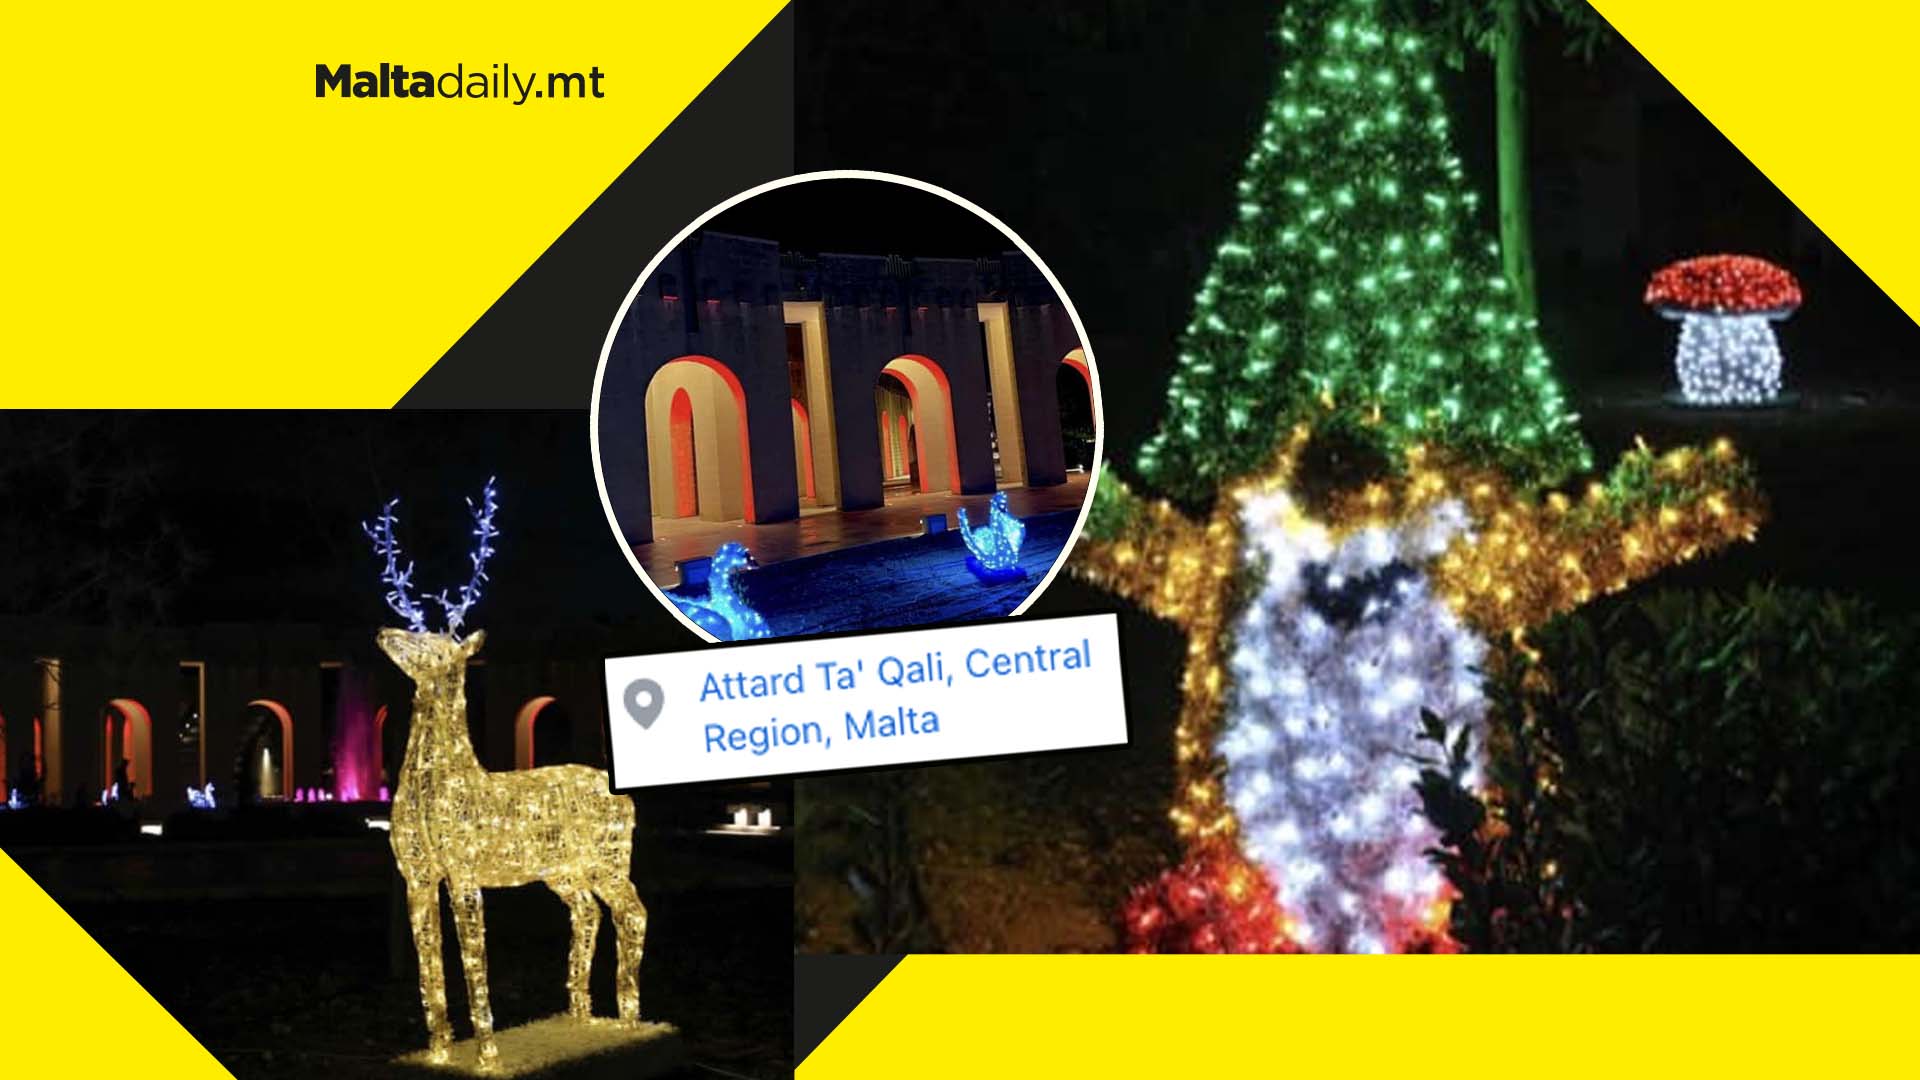 Ta’ Qali national park enters Christmas spirit with decorations